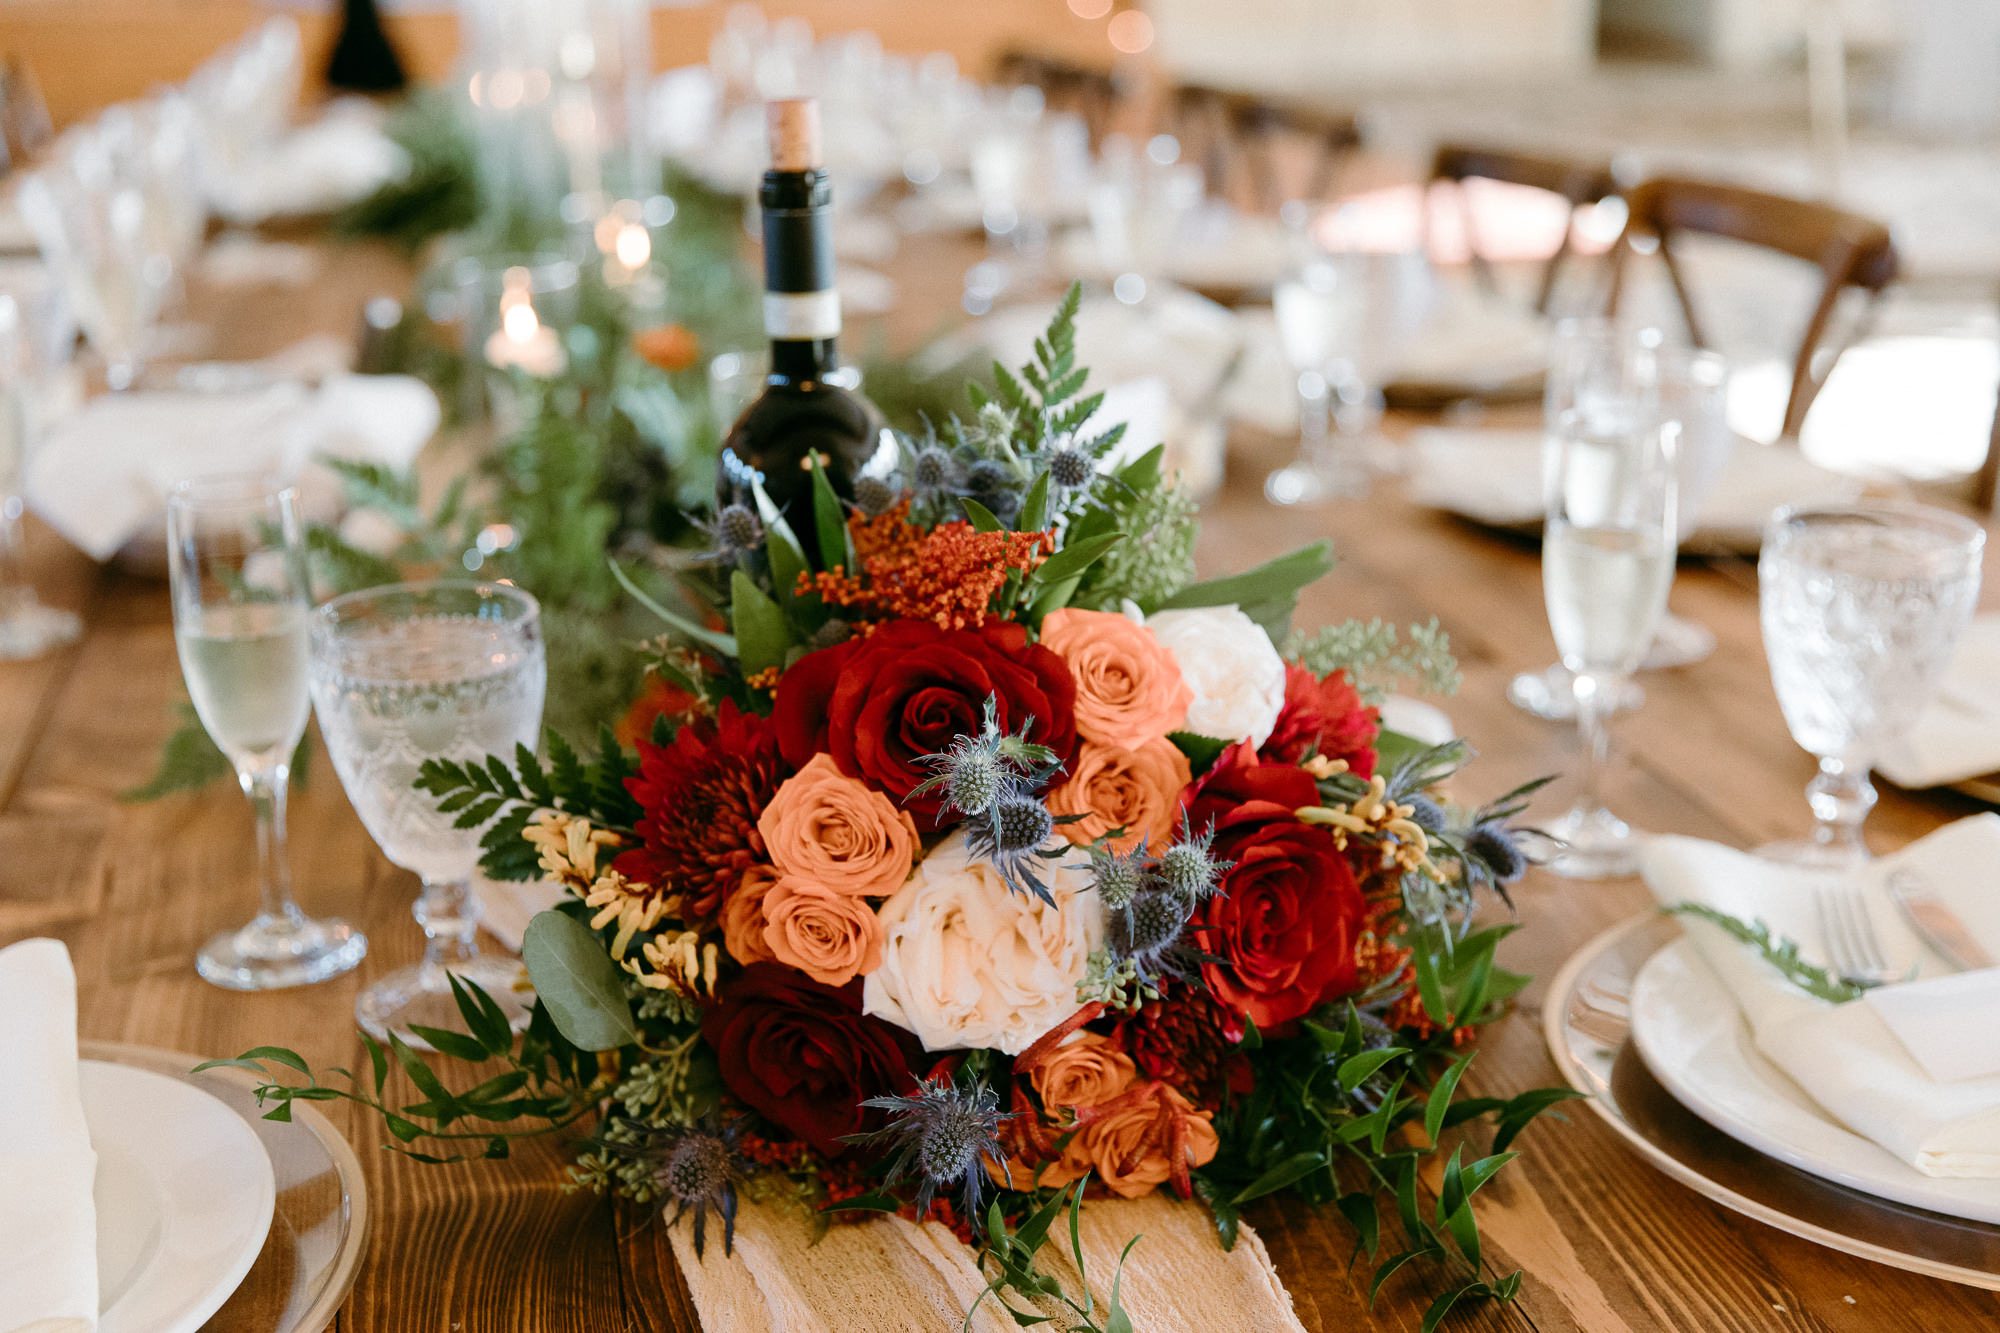 Rustic Italian Elegant Wedding Reception Decor, Lush Red, Terracotta, White Roses, Thistle, and Greenery Floral Bouquet | Tampa Bay Wedding Rentals Outside the Box Rentals